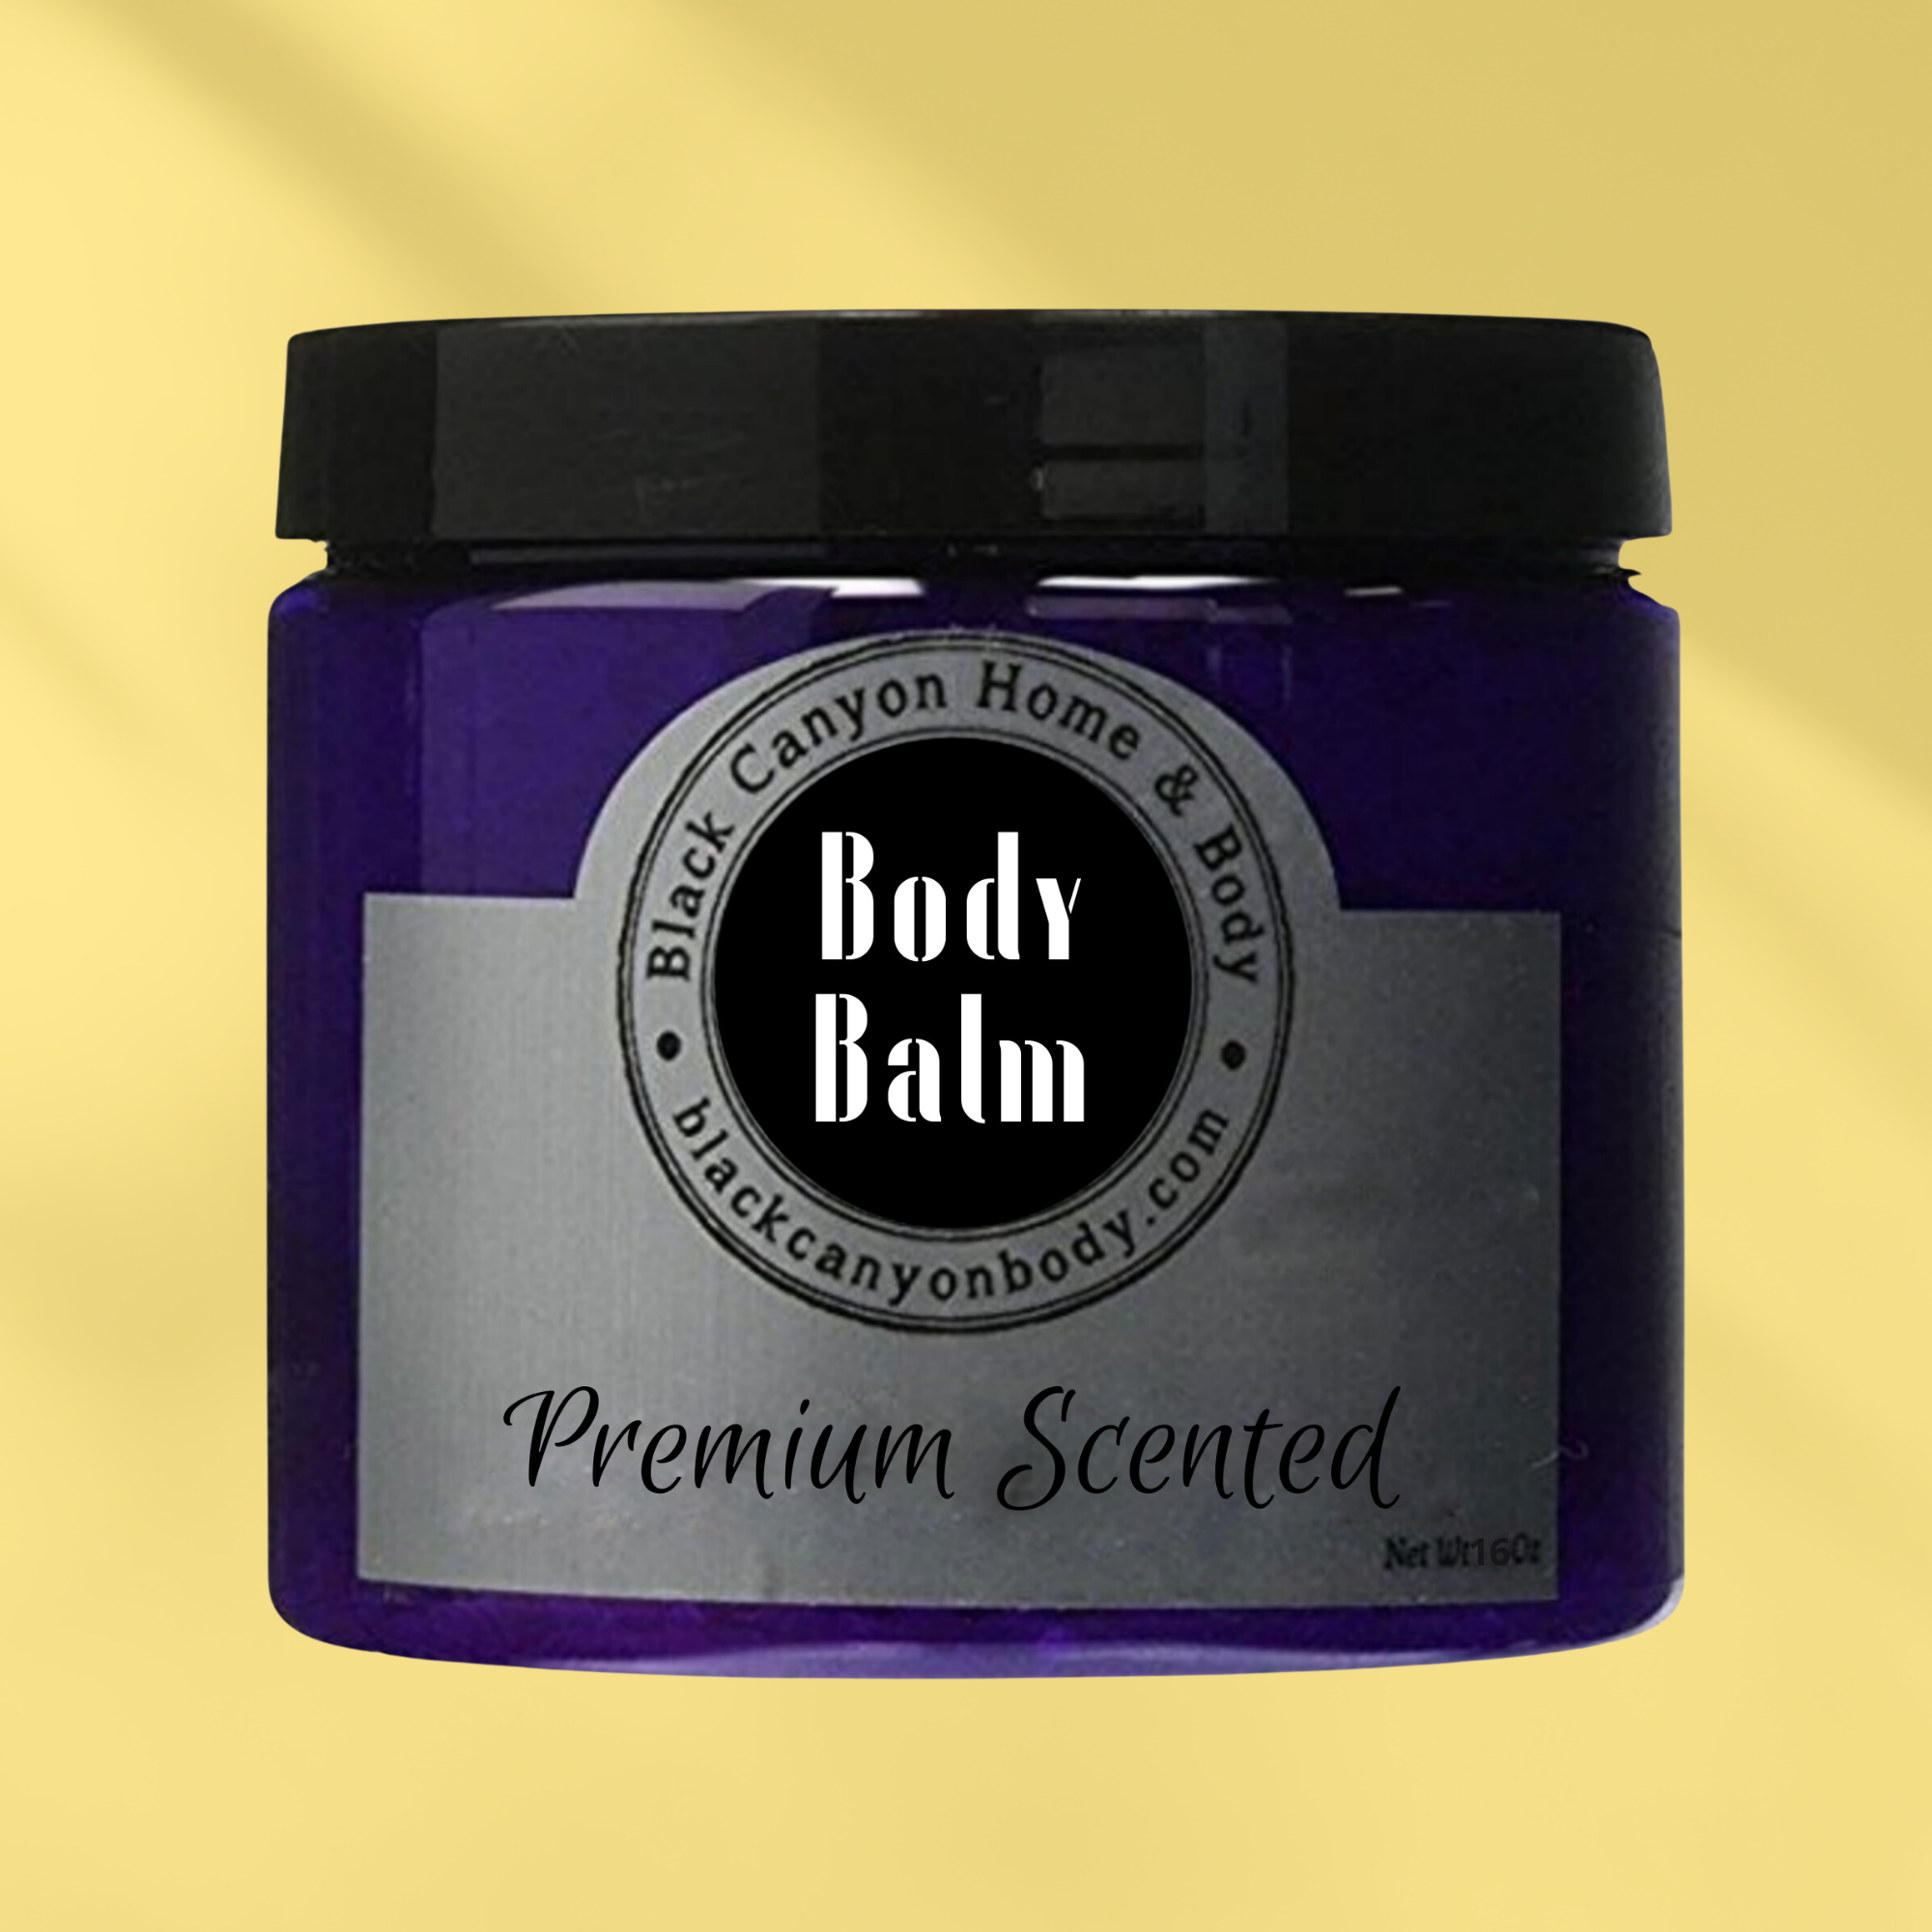 Black Canyon Beach Holiday Scented Natural Body Balm with Shea